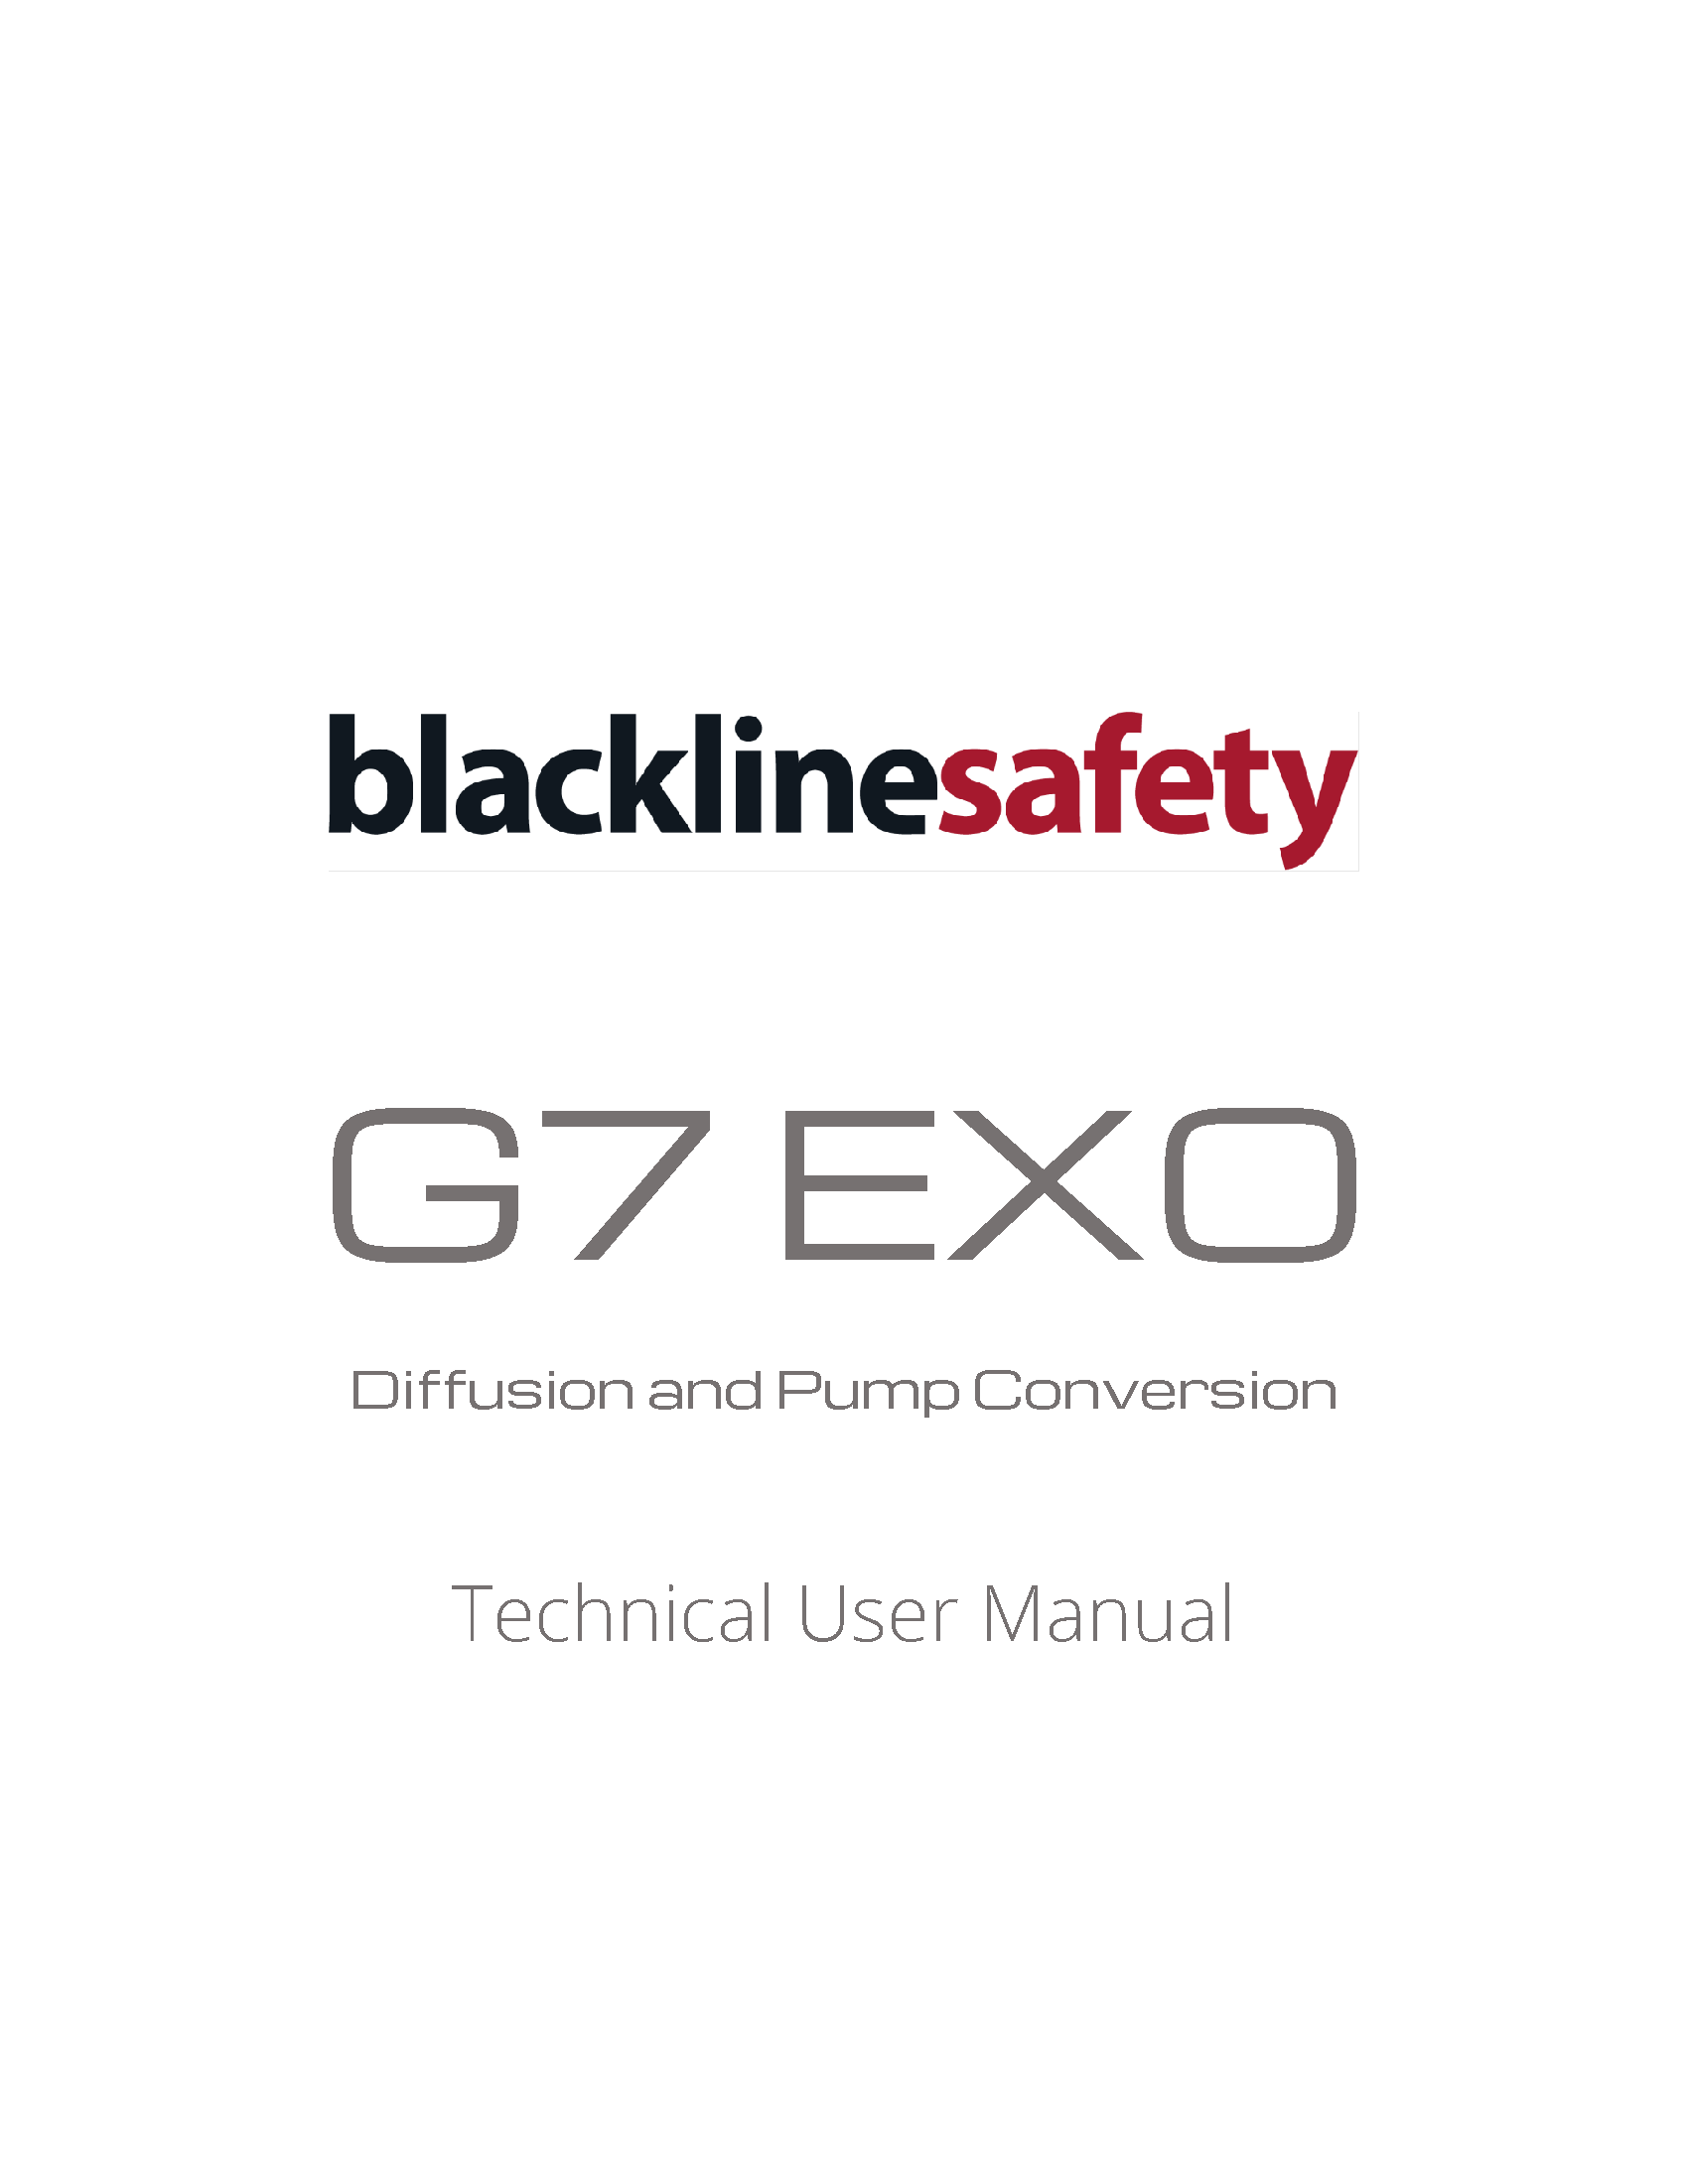 G7 EXO Pump and Diffusion Conversion Technical User Manual Cover